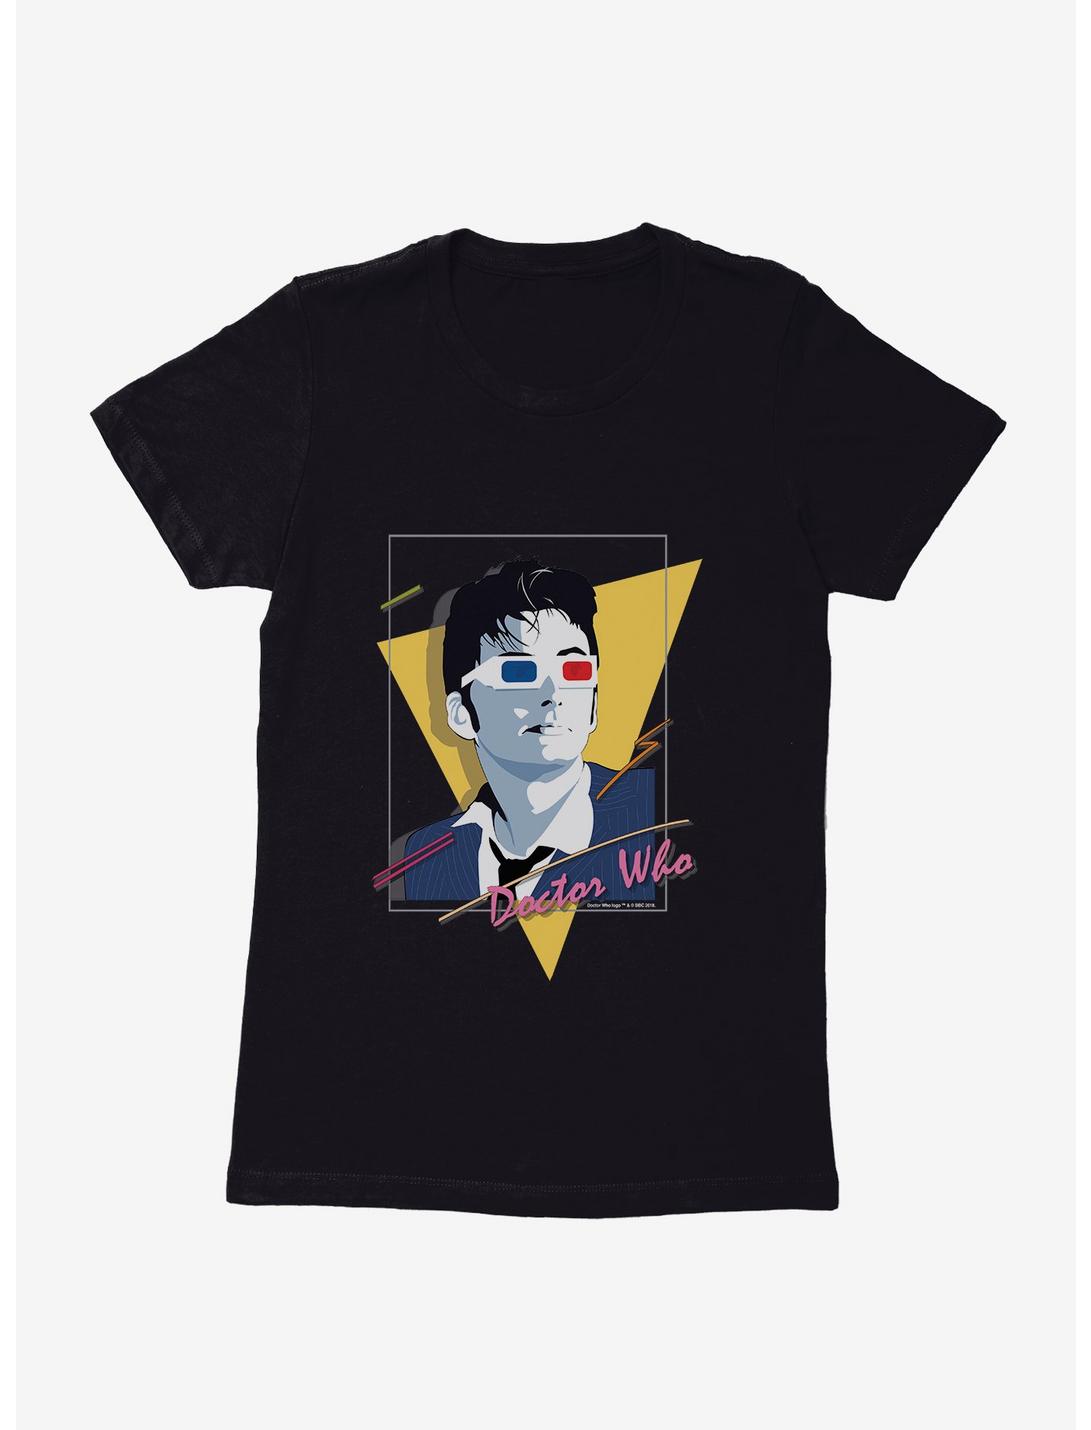 Doctor Who The Tenth Doctor 80s Art Womens T-Shirt, BLACK, hi-res